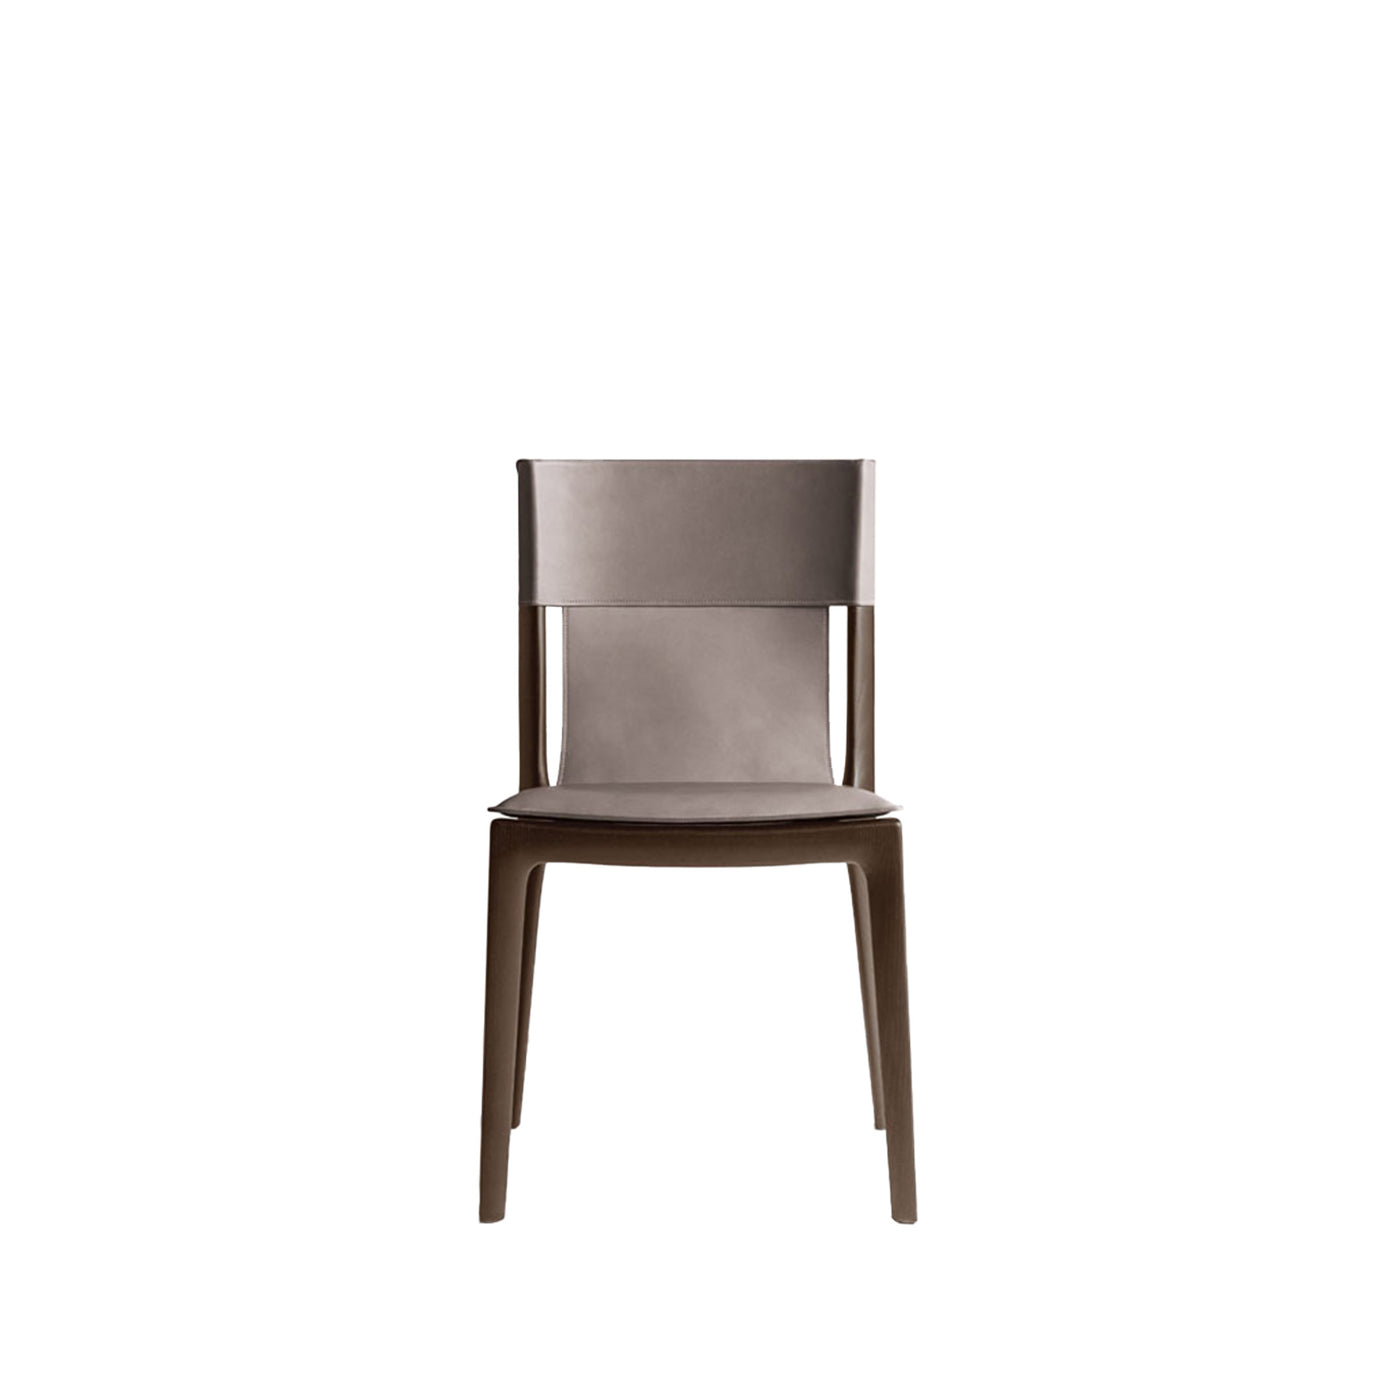 Leather Dining Chair ISADORA by Roberto Lazzeroni for Poltrona Frau 05